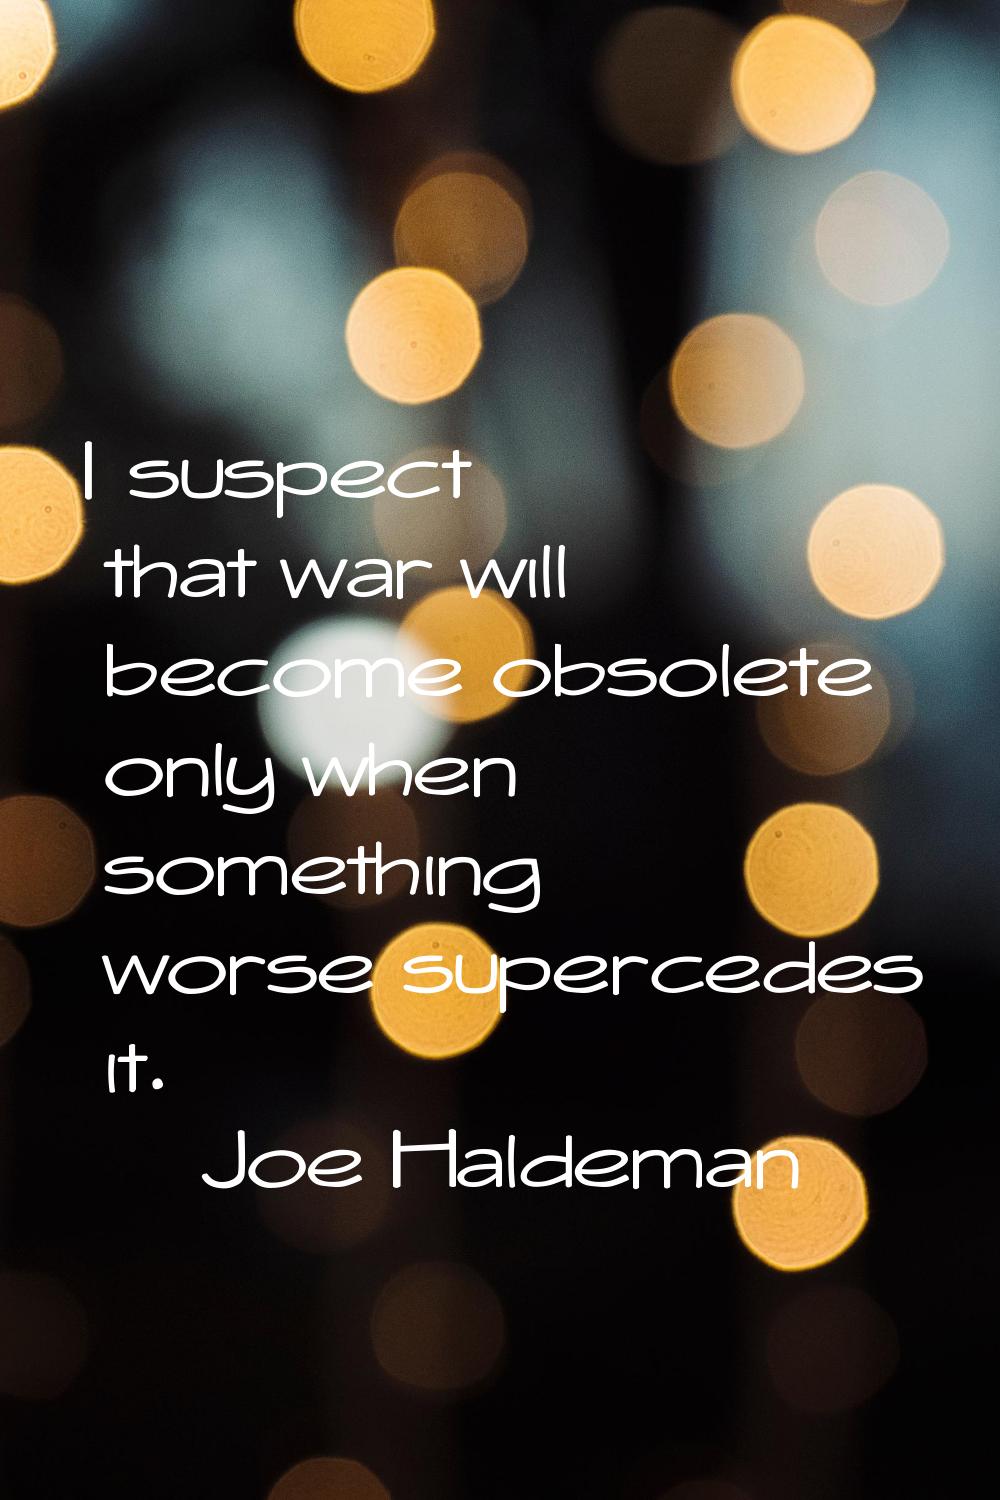 I suspect that war will become obsolete only when something worse supercedes it.